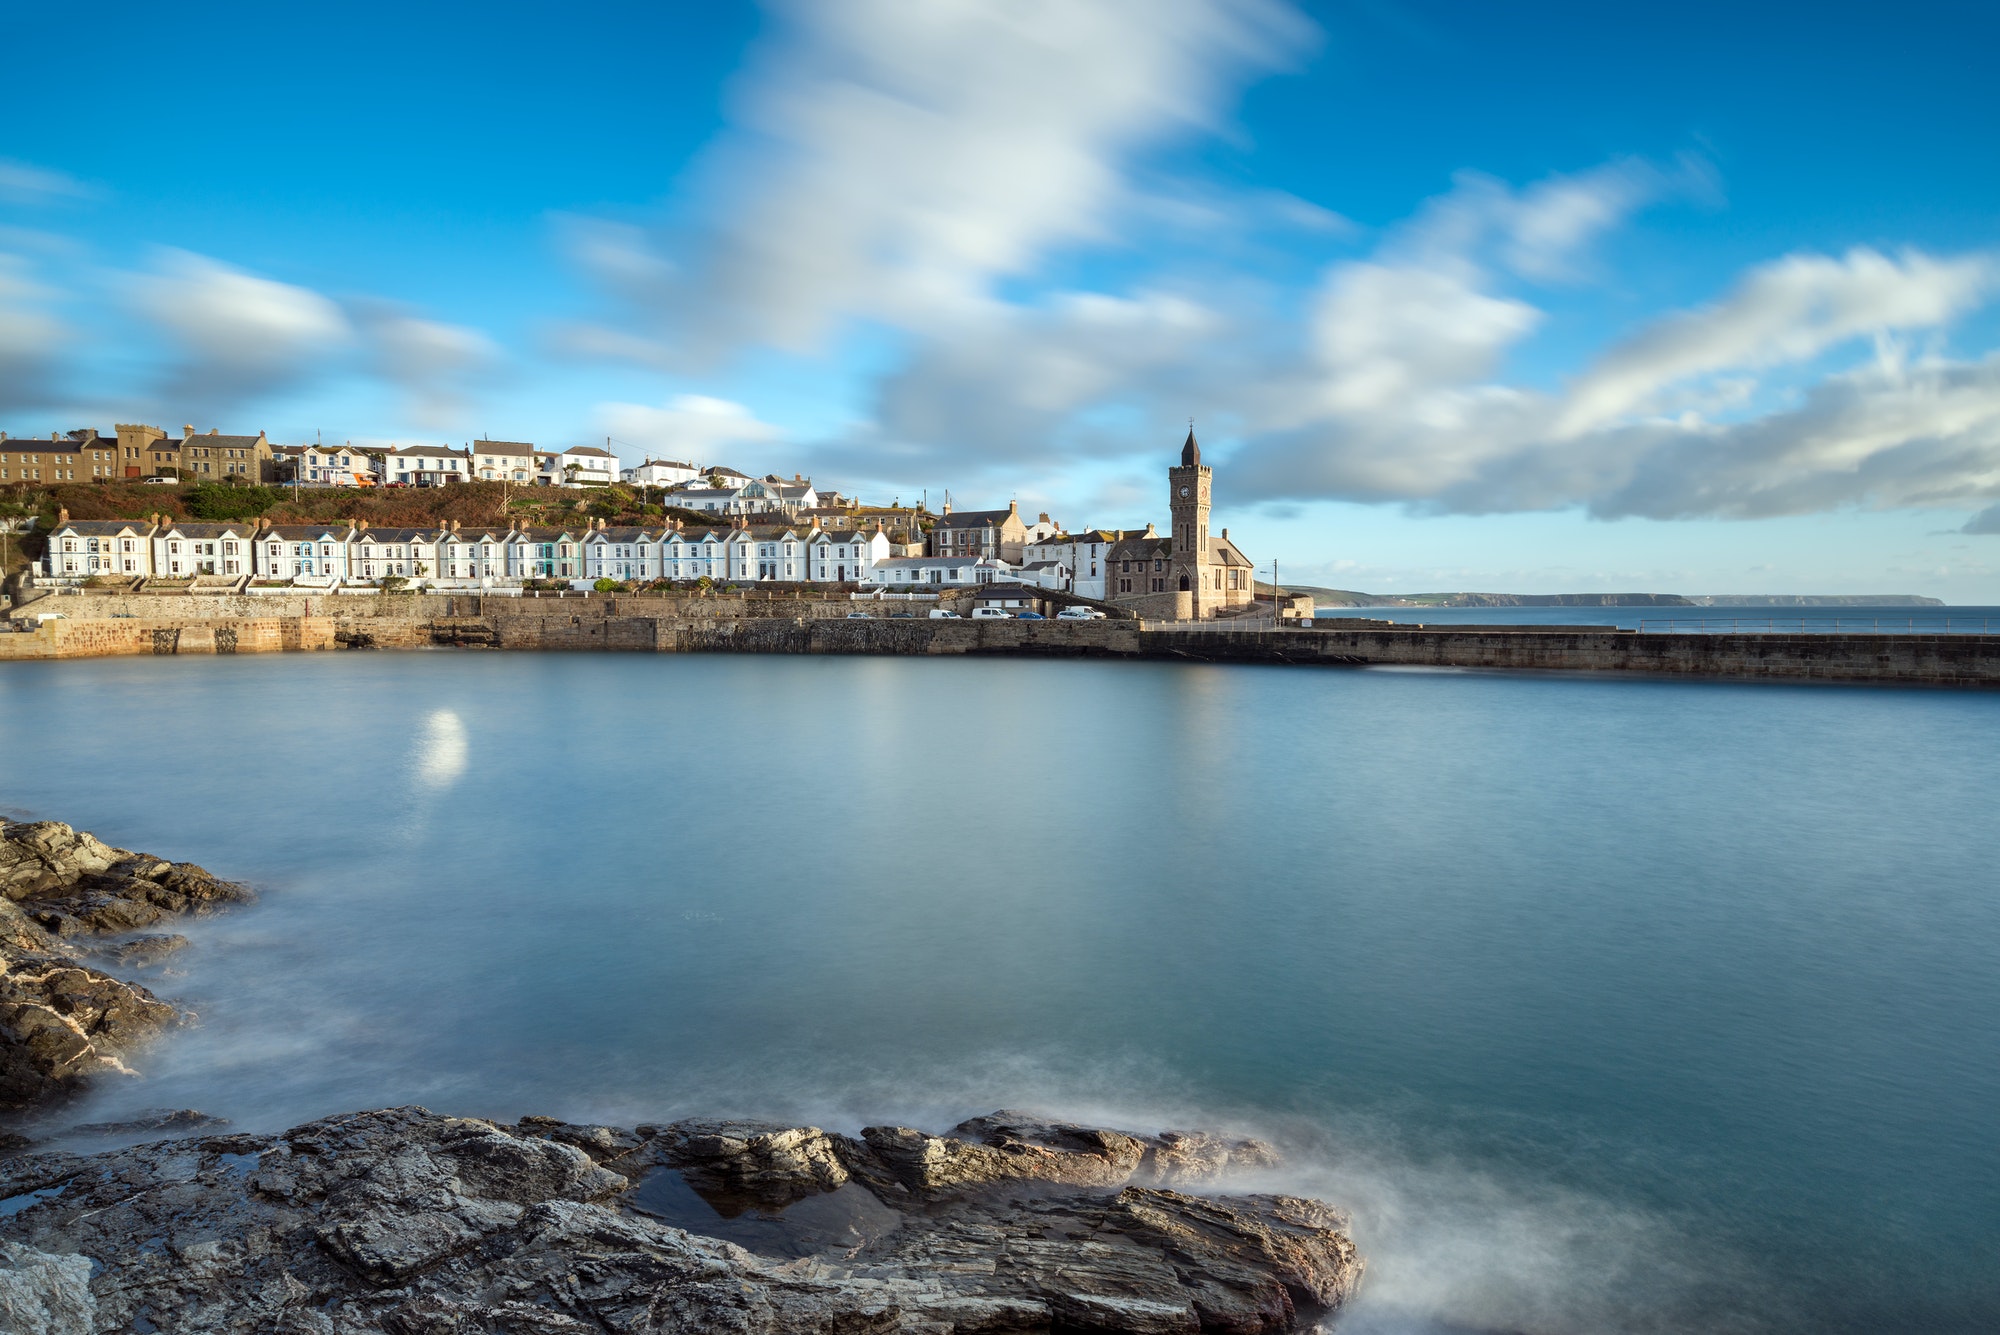 Porthleven harbour with calm water in the foreground and the houses painted white next to the church